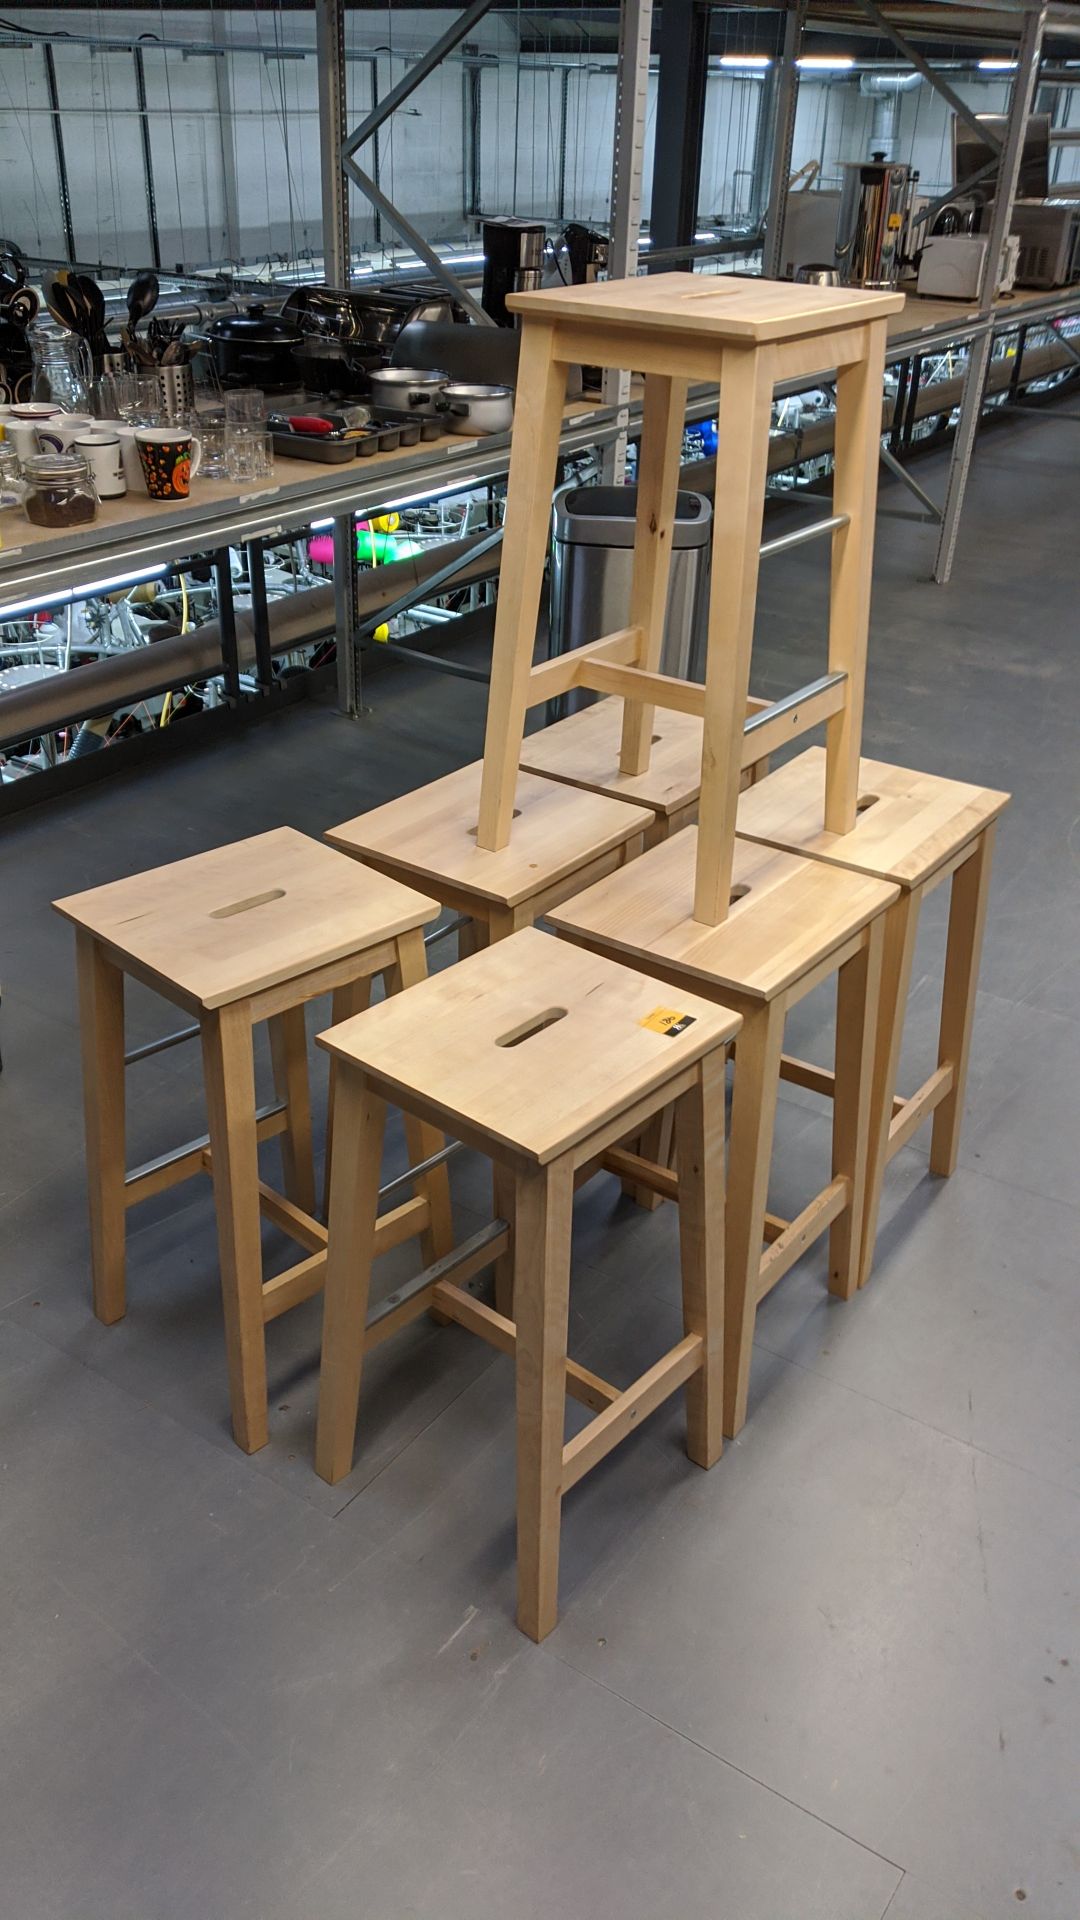 7 off wooden stools Please note, lots 1 - 200 are located at Samson Hosiery's former trading